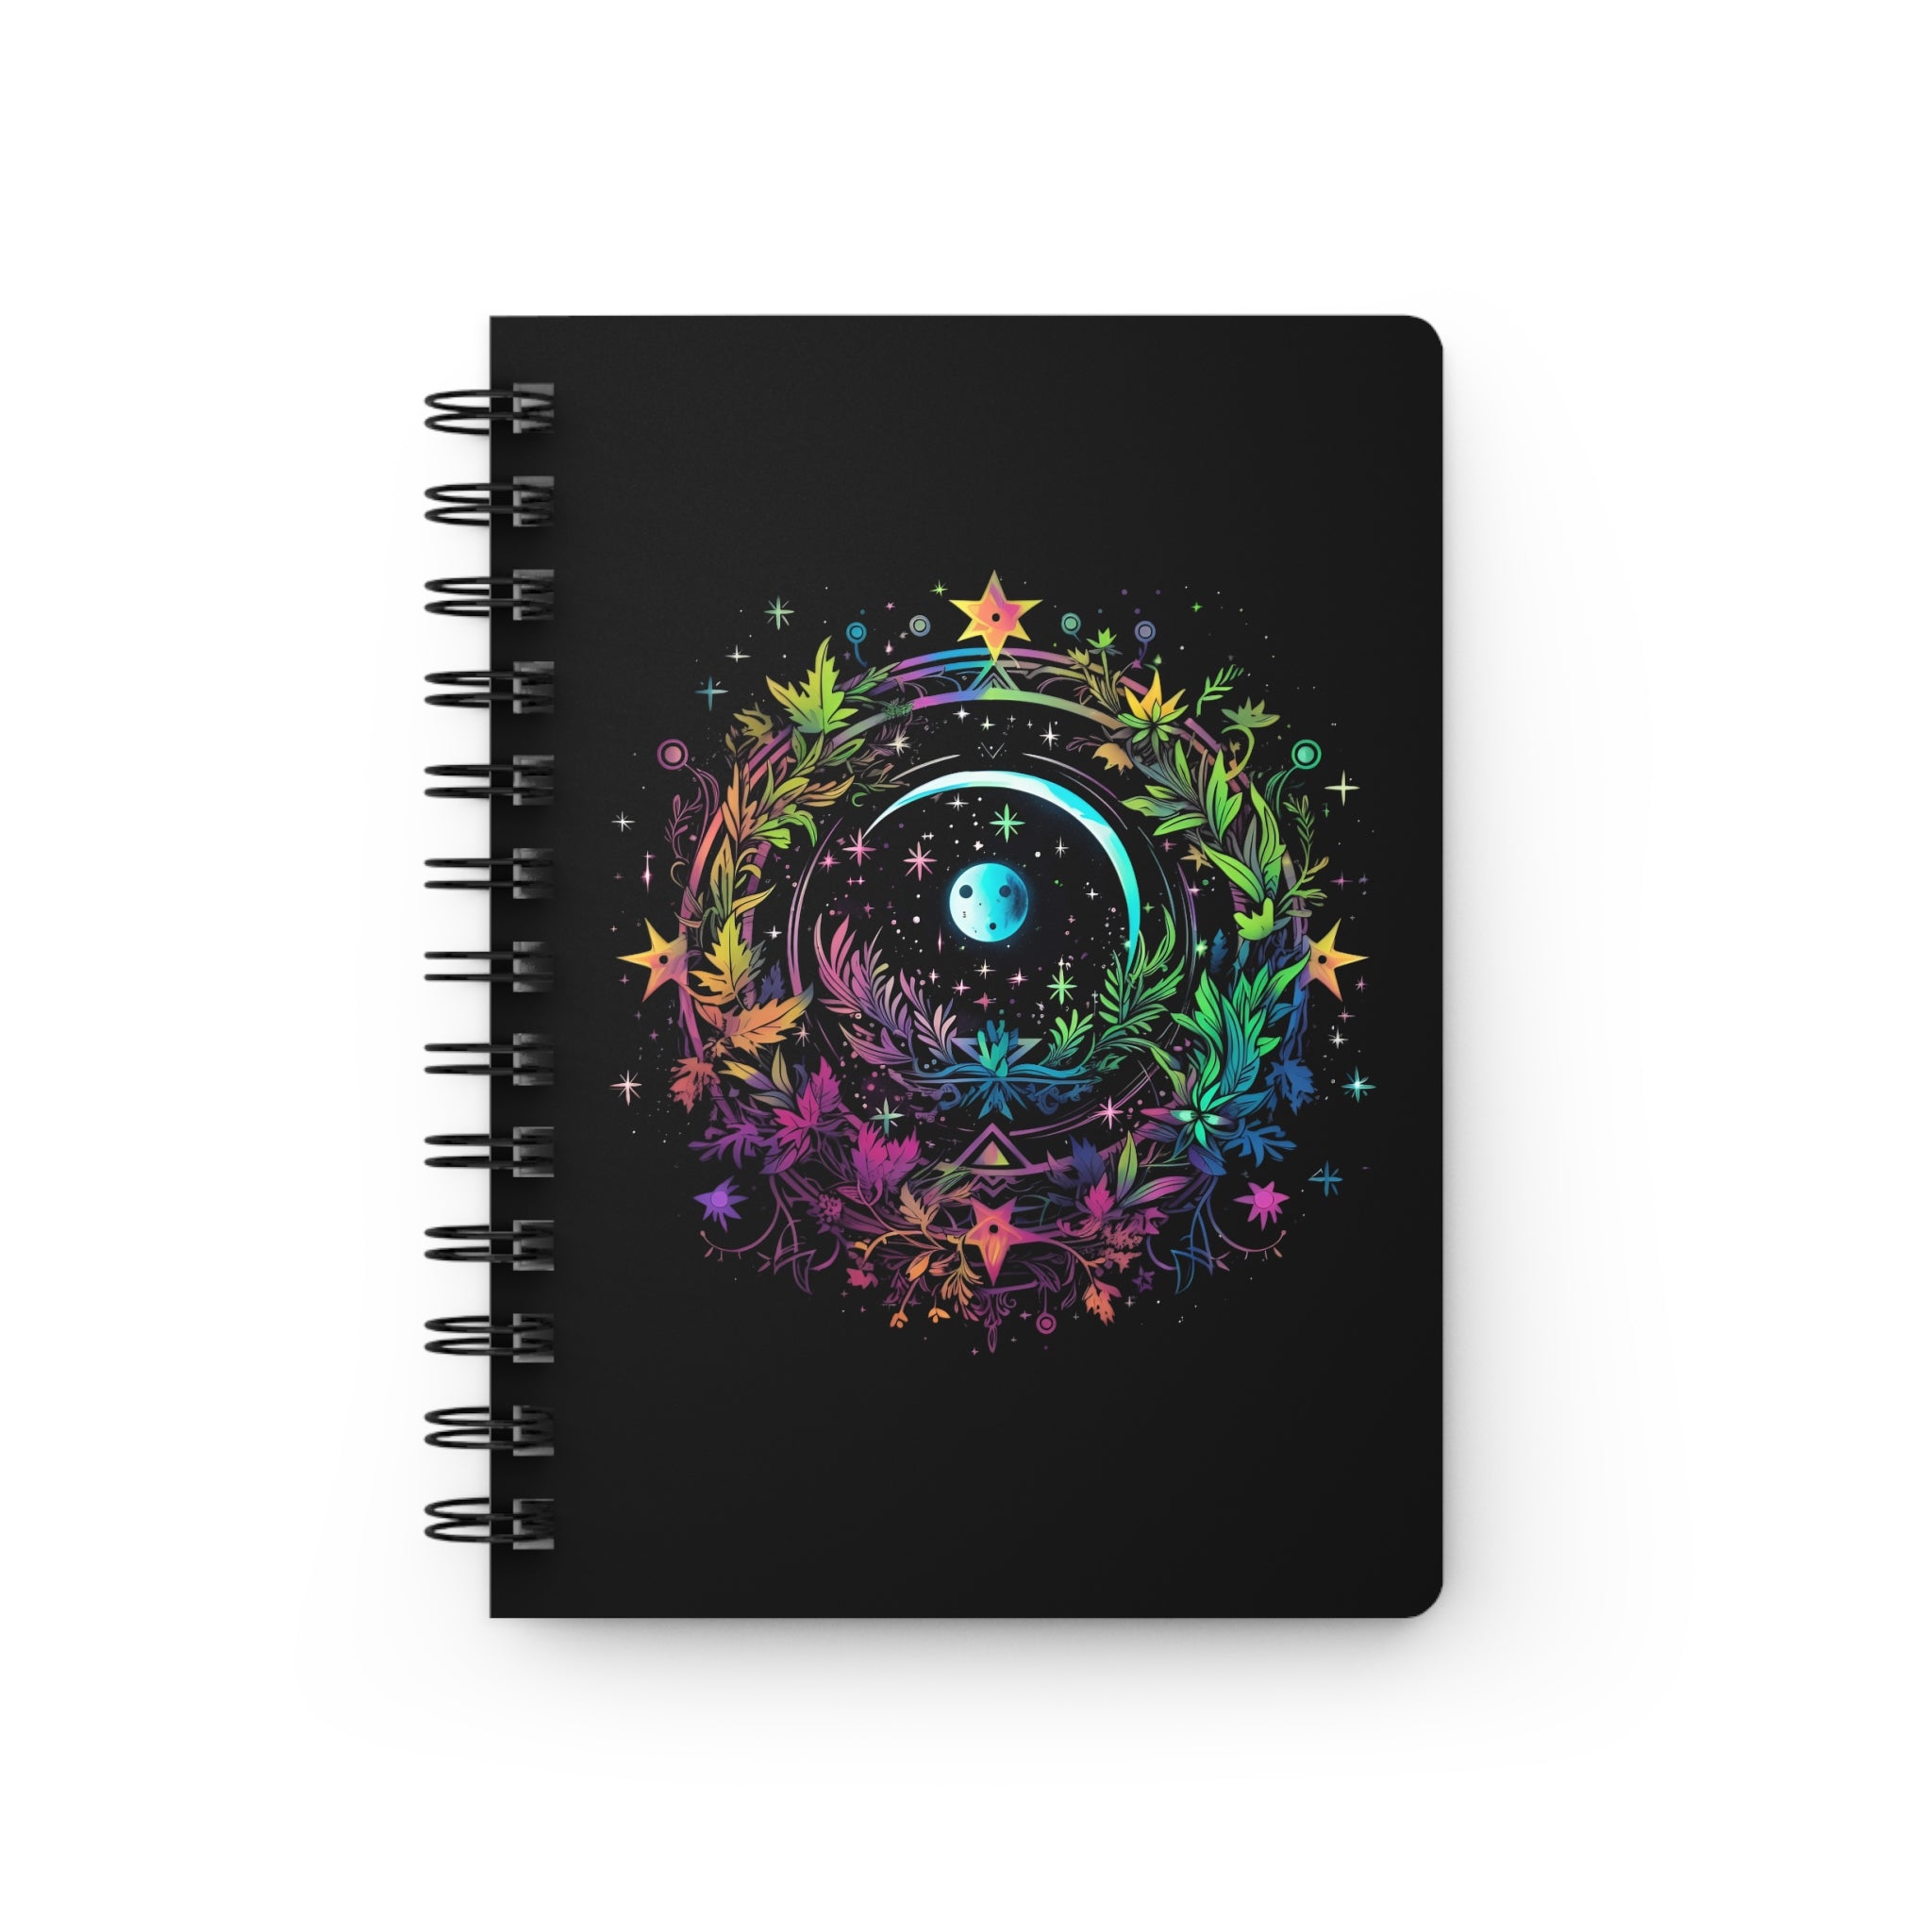 Vibrant Psychedelic Cosmos Notebook, Spiral Lined 5 x 7 inch